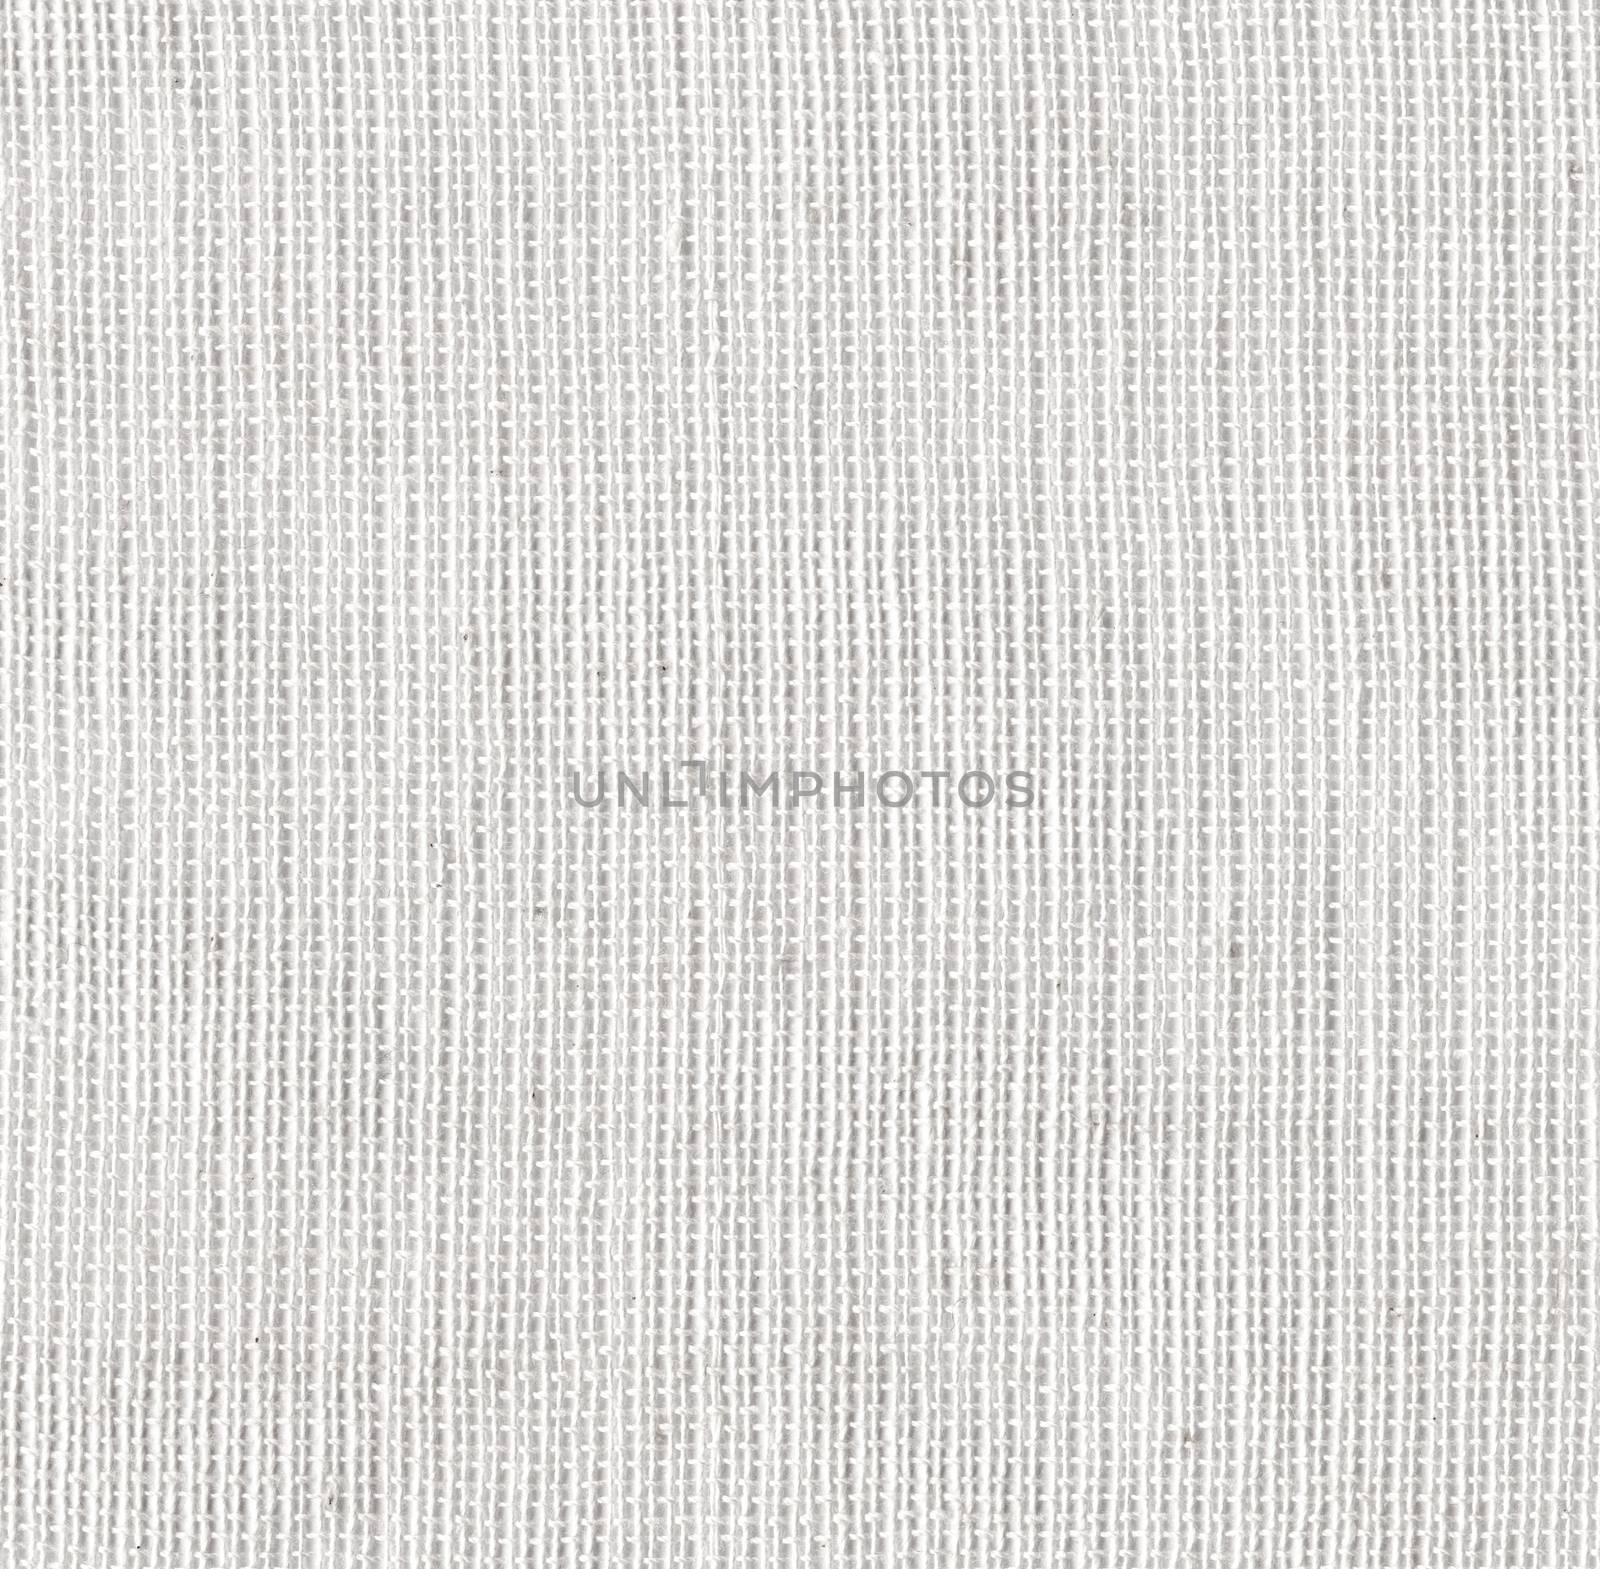 Fabric Texture. White Canvas Background